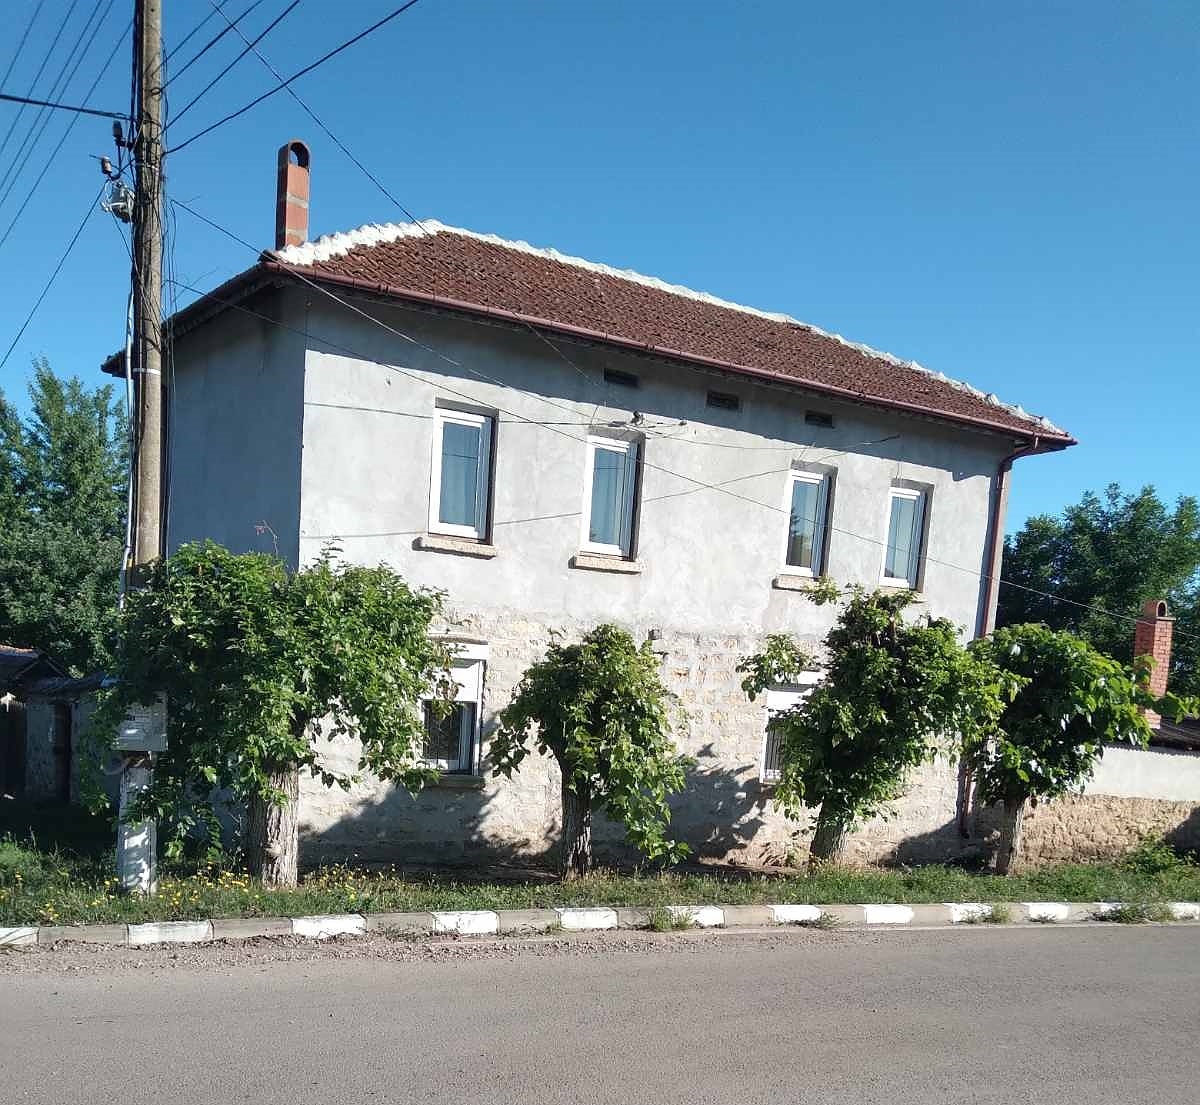 /refurbished-country-house-with-annex-and-nice-yard-situated-in-a-big-village-near-river-55-km-north-of-vratsa-bulgaria/